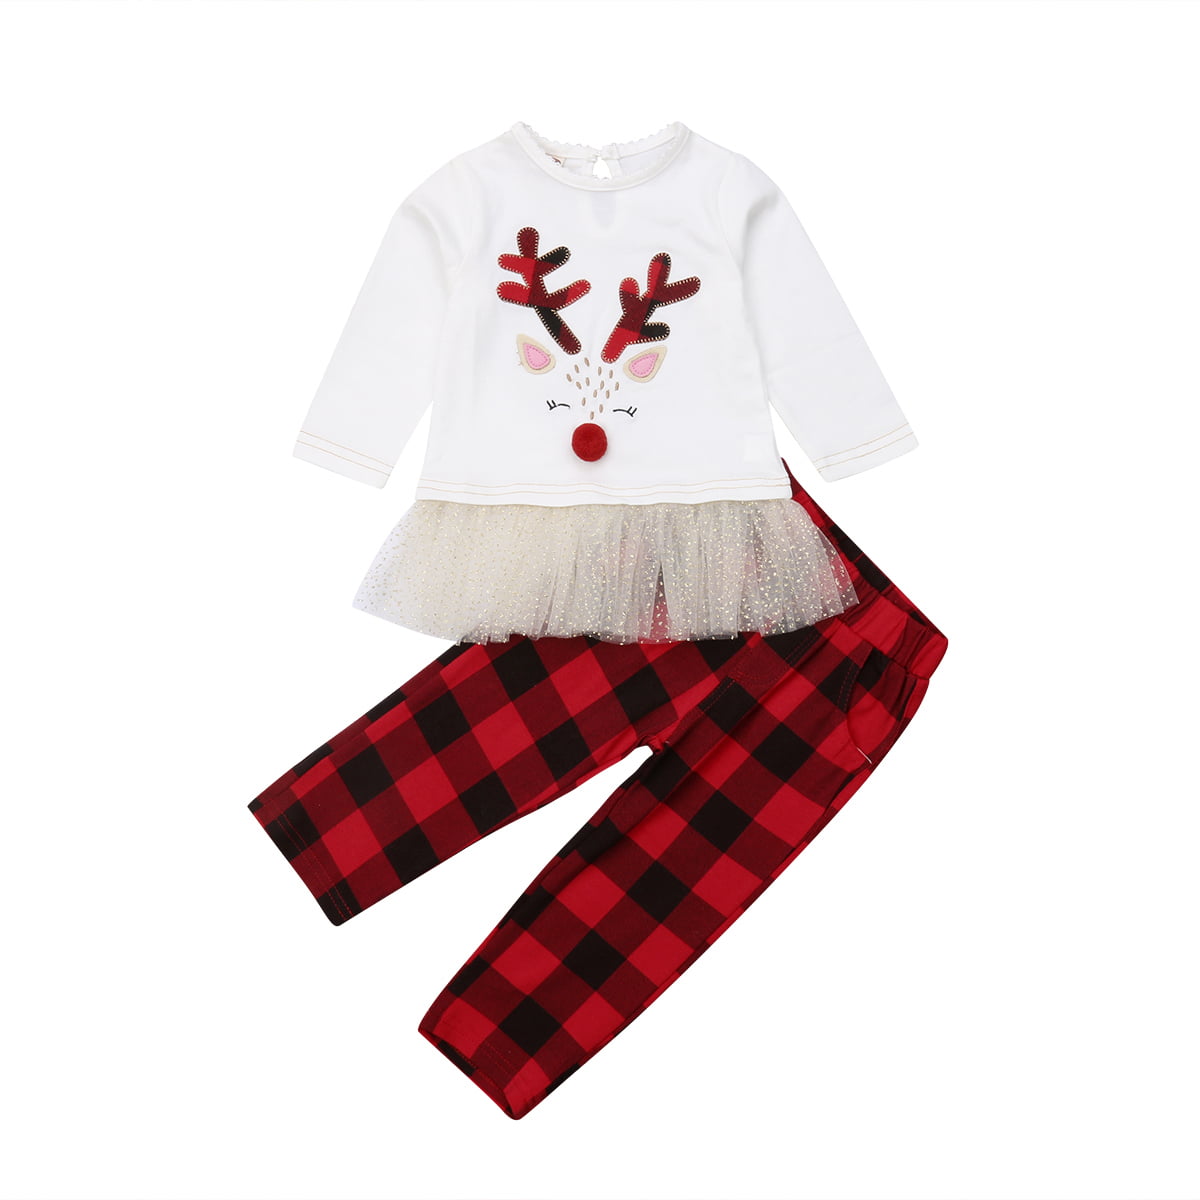 Christmas Plaid Toddler Kids Baby Girl Outfit Clothes T Shirt Top Dress+Belt Set